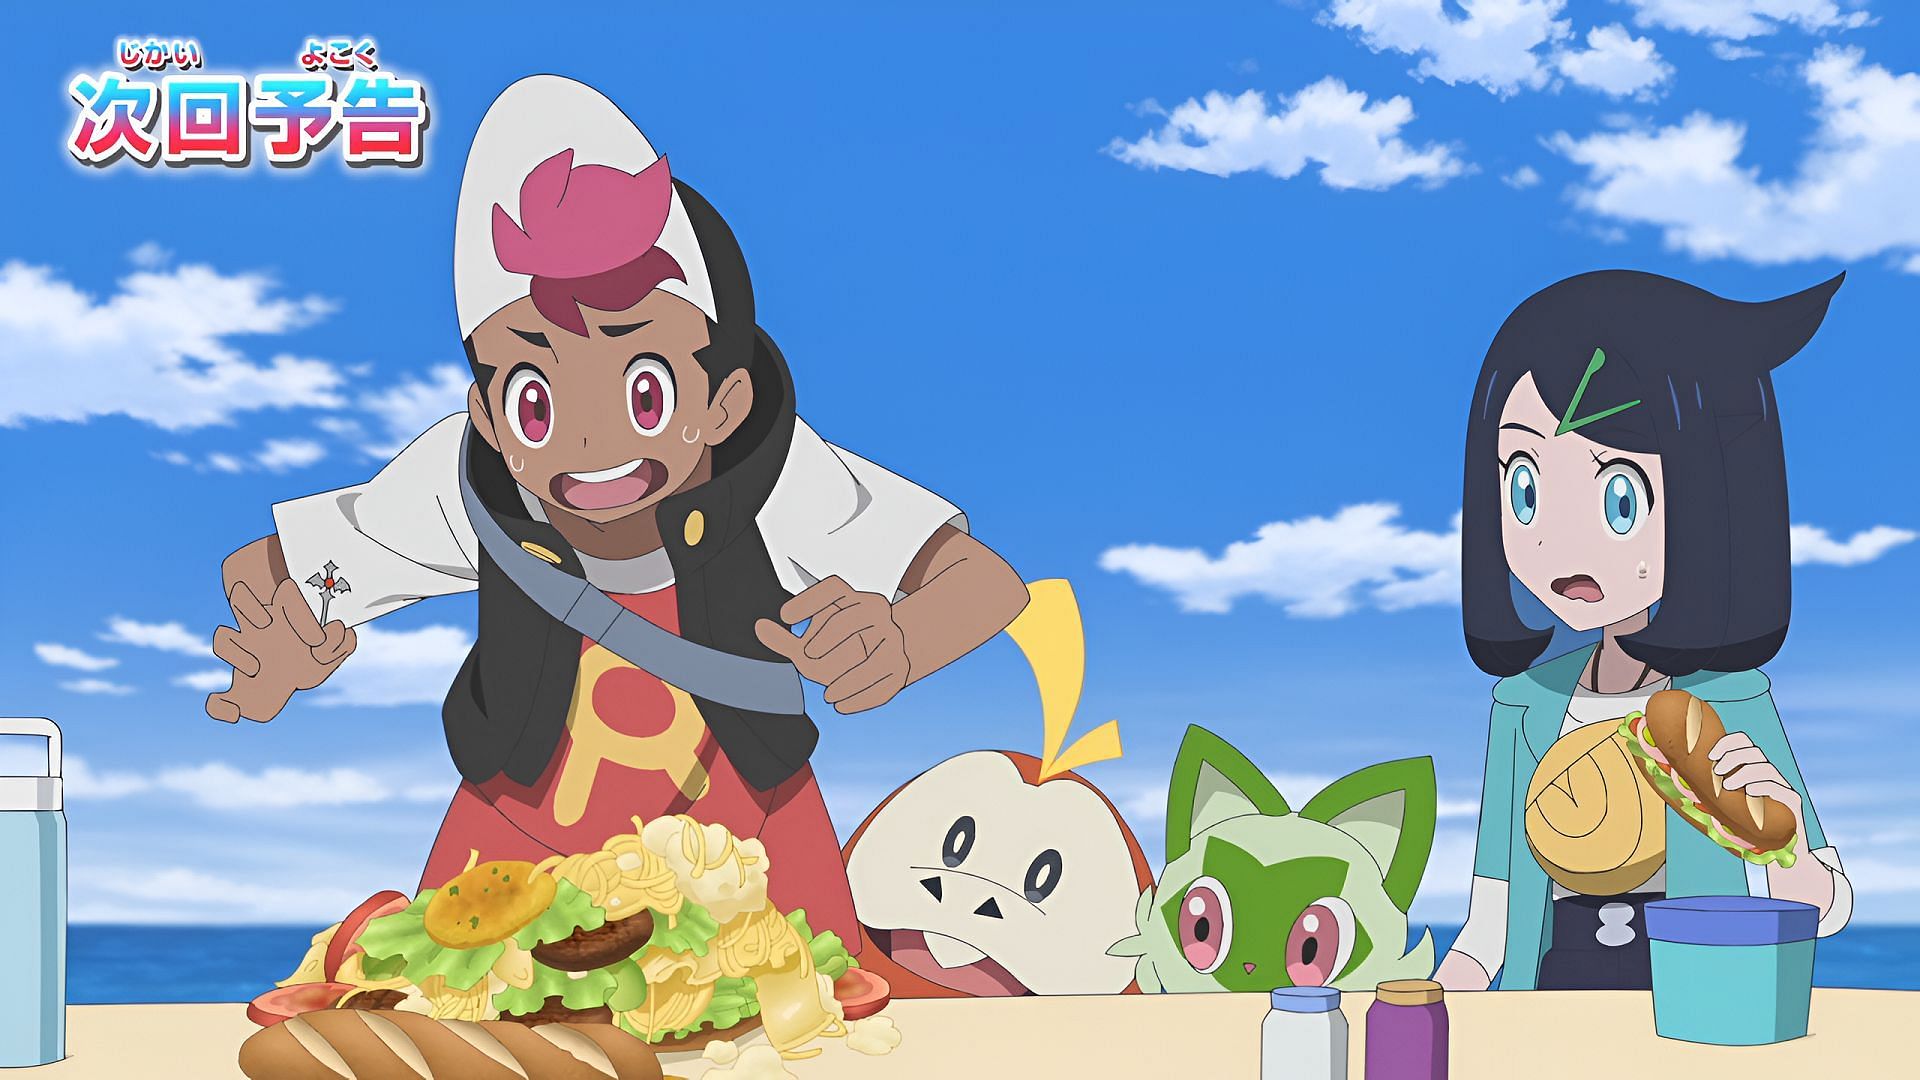 Pokemon Horizons Episode 13: Release date, where to watch, preview, and more